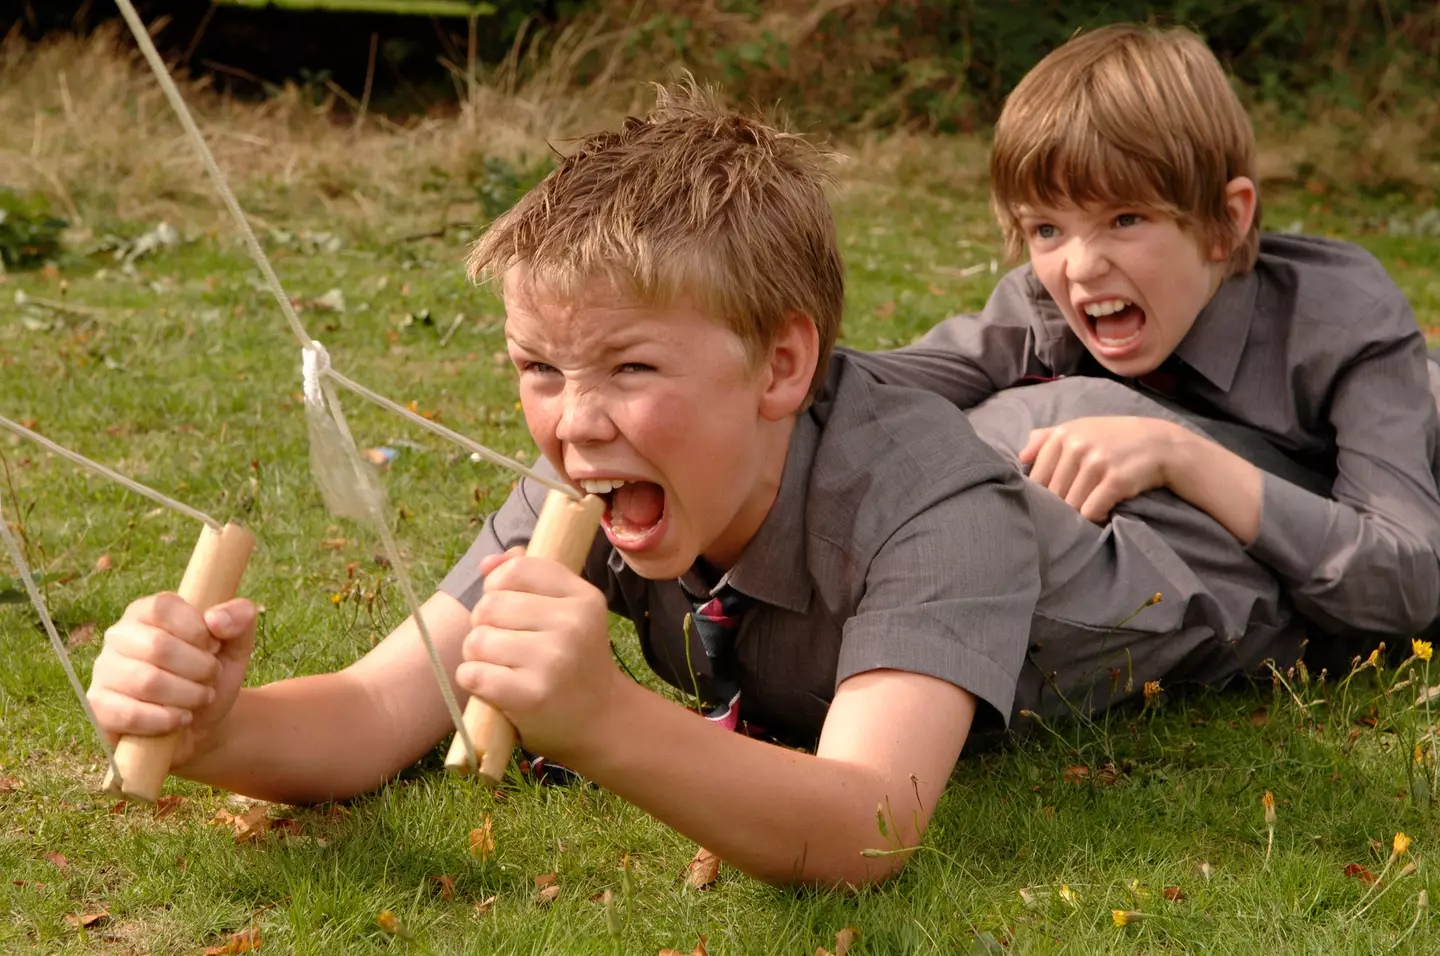 Will Poulter and Bill Milner in Son of Rambow.